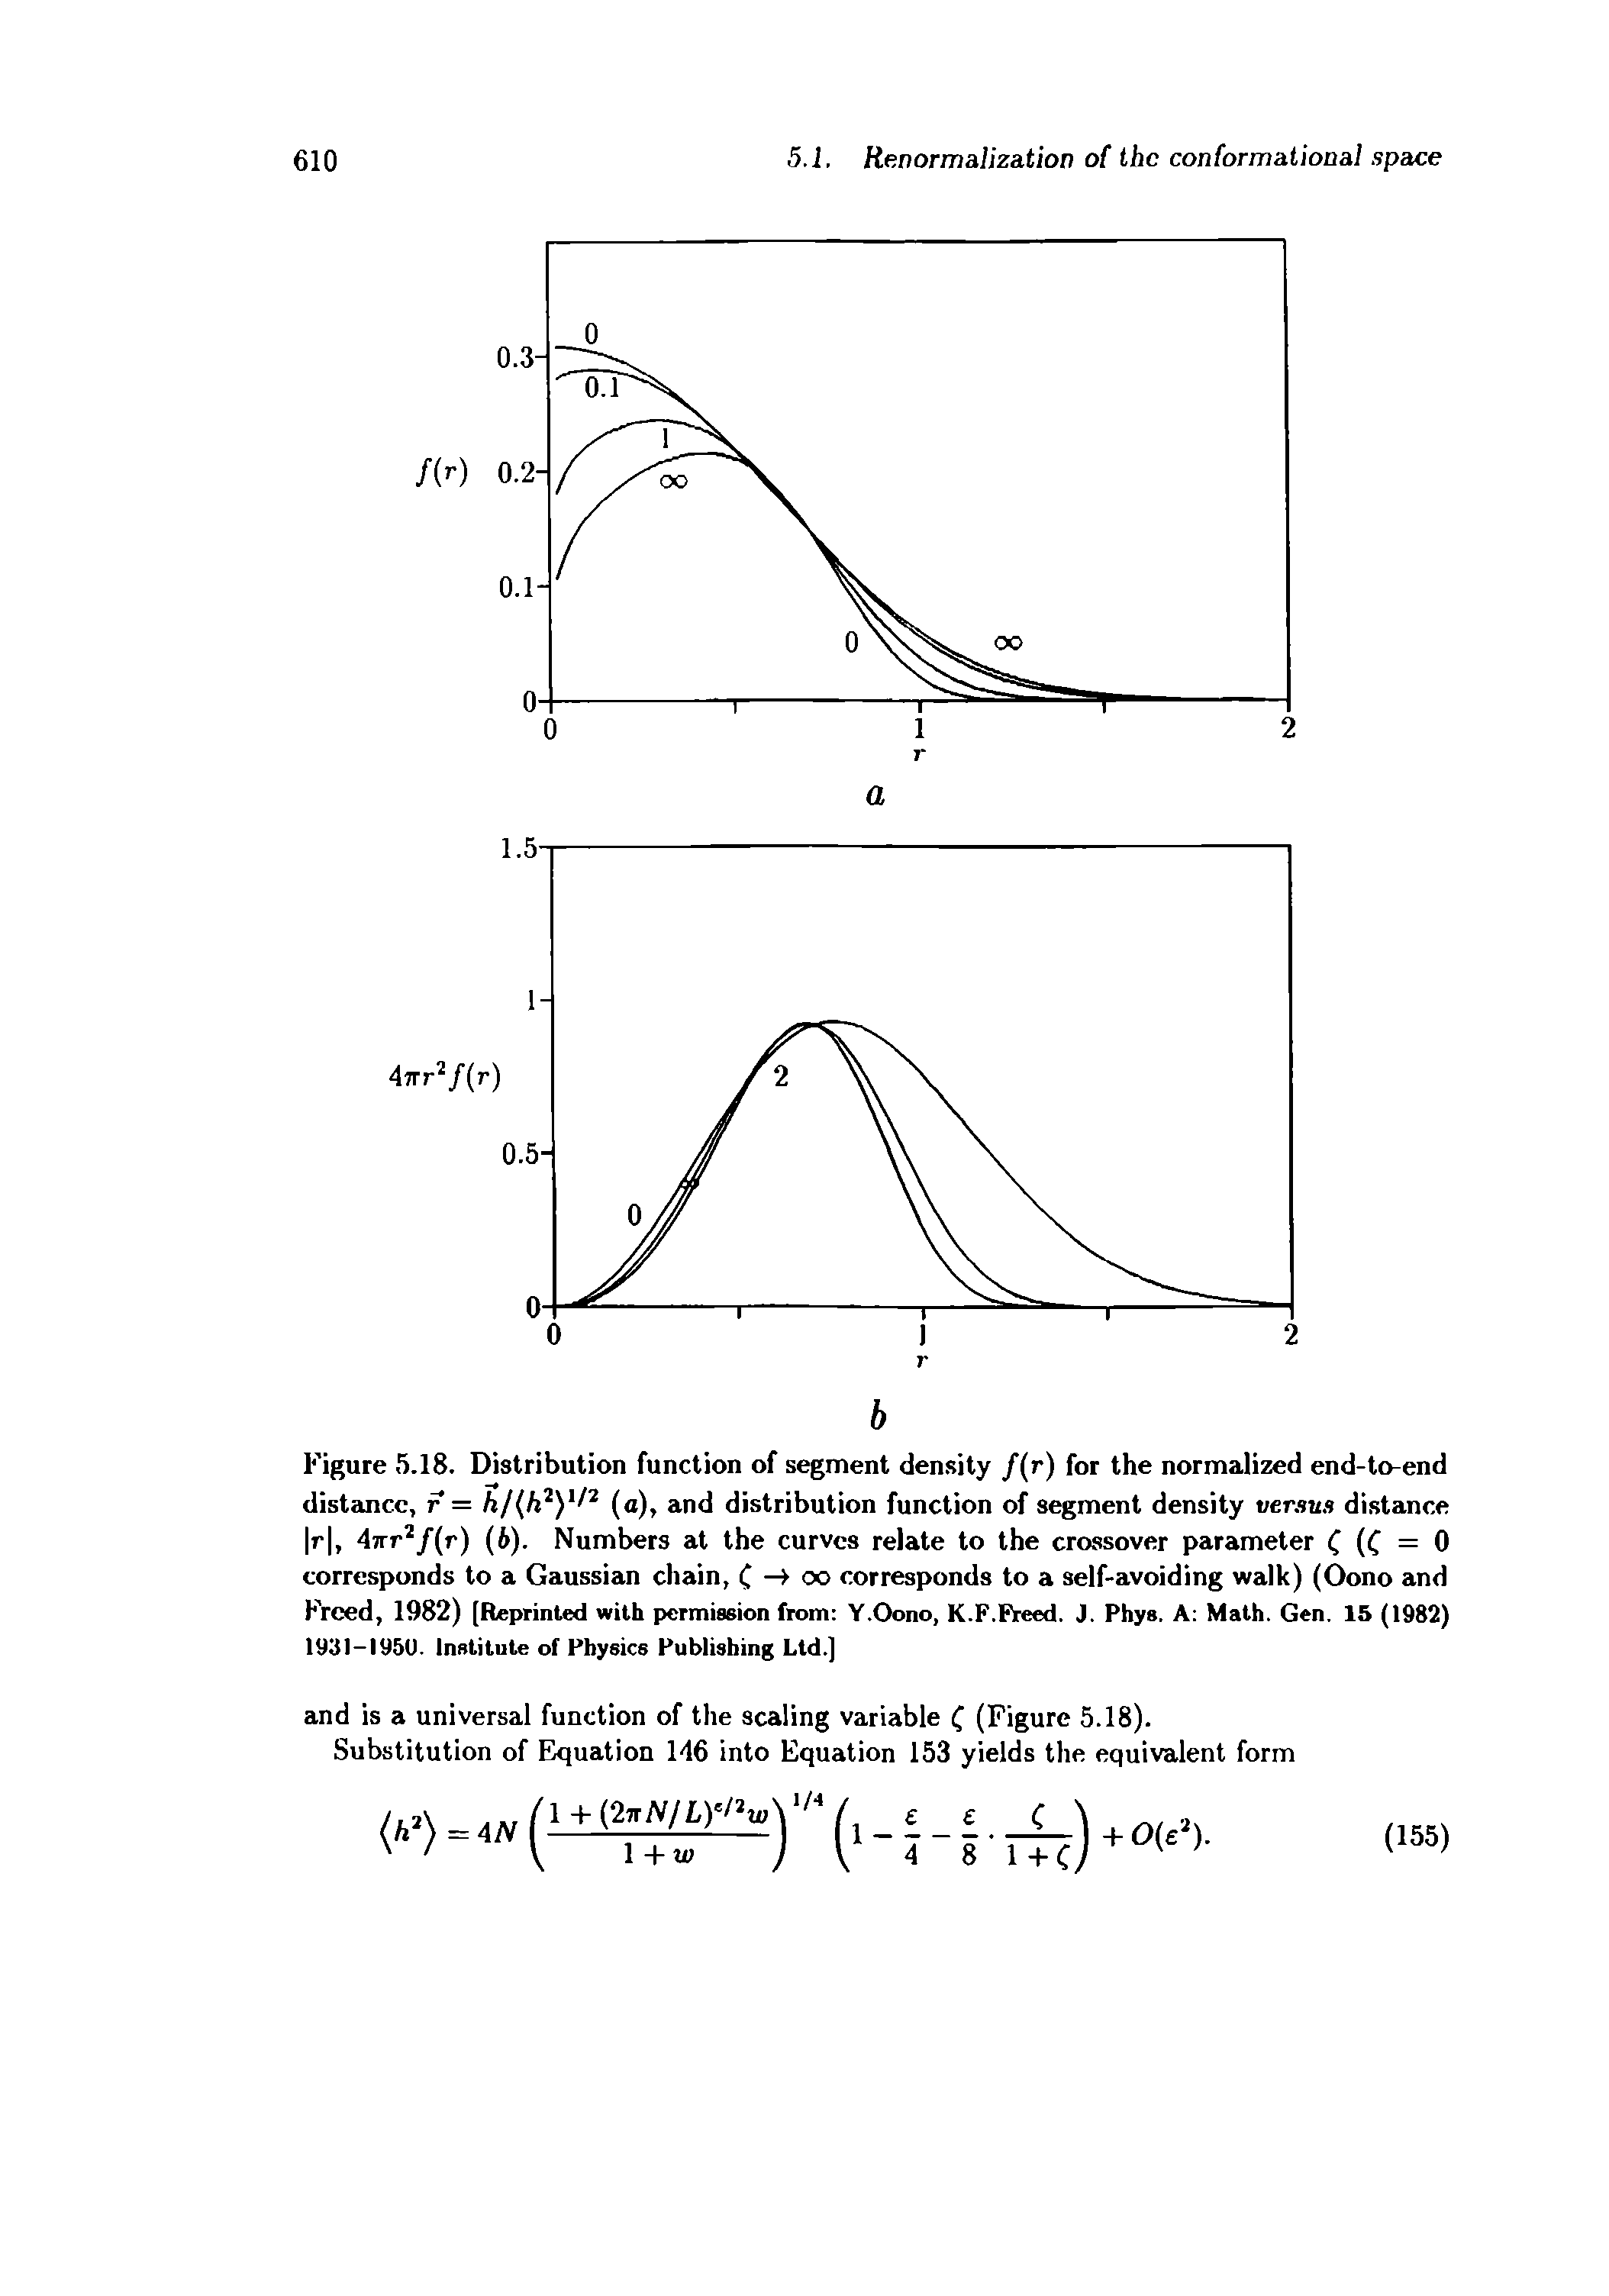 Figure 5.18. Distribution function of segment density f r) for the normalized end-to-end distance, r = hl h yf (o), and distribution function of segment density versu.s distance r, 47rr /(r) (6). Numbers at the curves relate to the crossover parameter C (C = 0 corresponds to a Gaussian chain, C oo corresponds to a self-avoiding walk) (Oono and Freed, 1982) [Reprinted with permission from Y.Oono, K.F.Fiwed. J. Phys. A Math. Gen. 15 (1982) I93I-I95U. Institute of Physics Publishing Ltd.]...